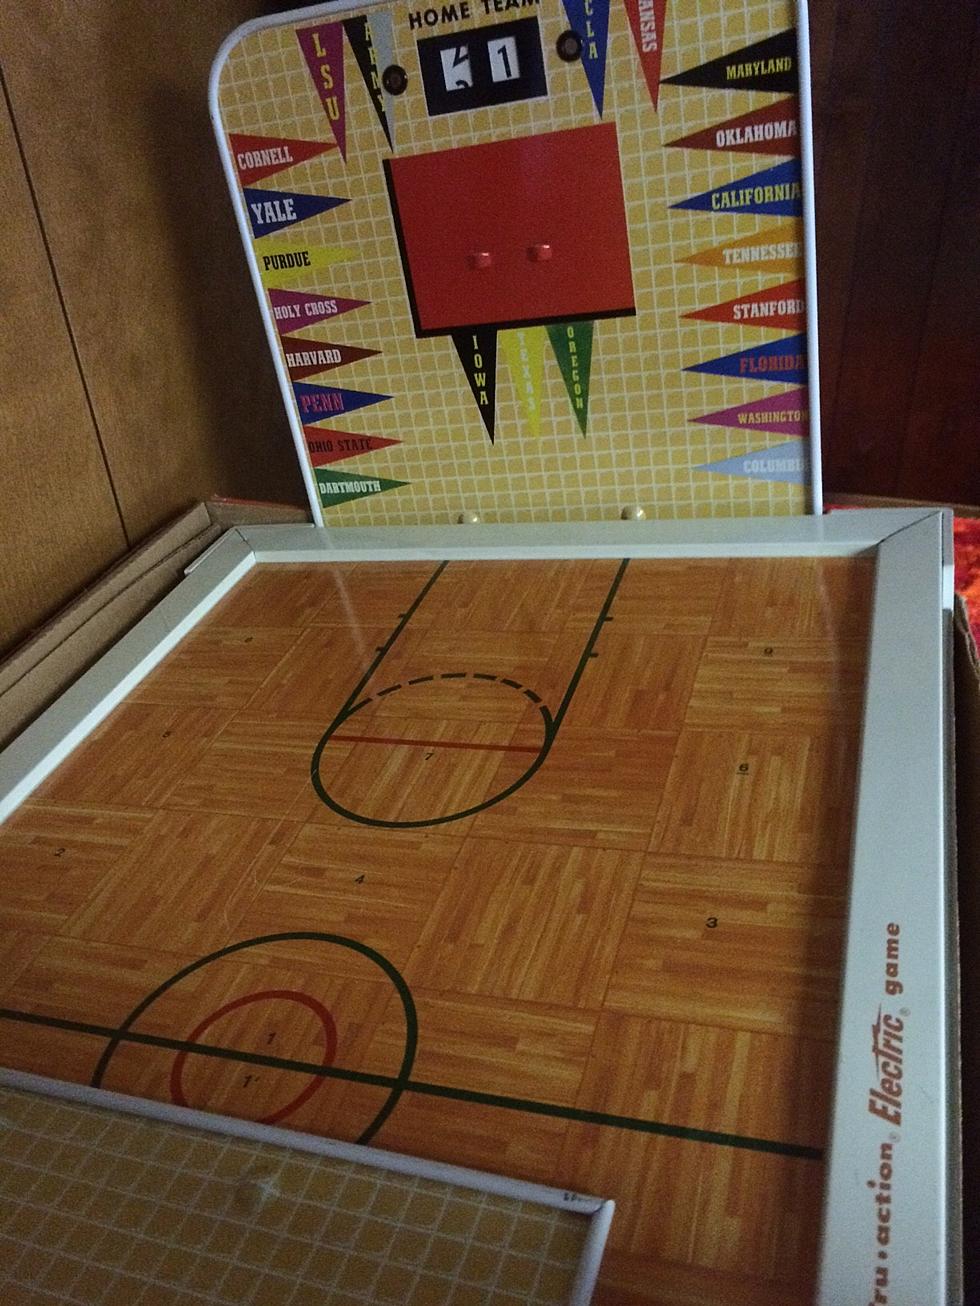 Classic Vibrating Basketball Game Takes Me Back To My Childhood